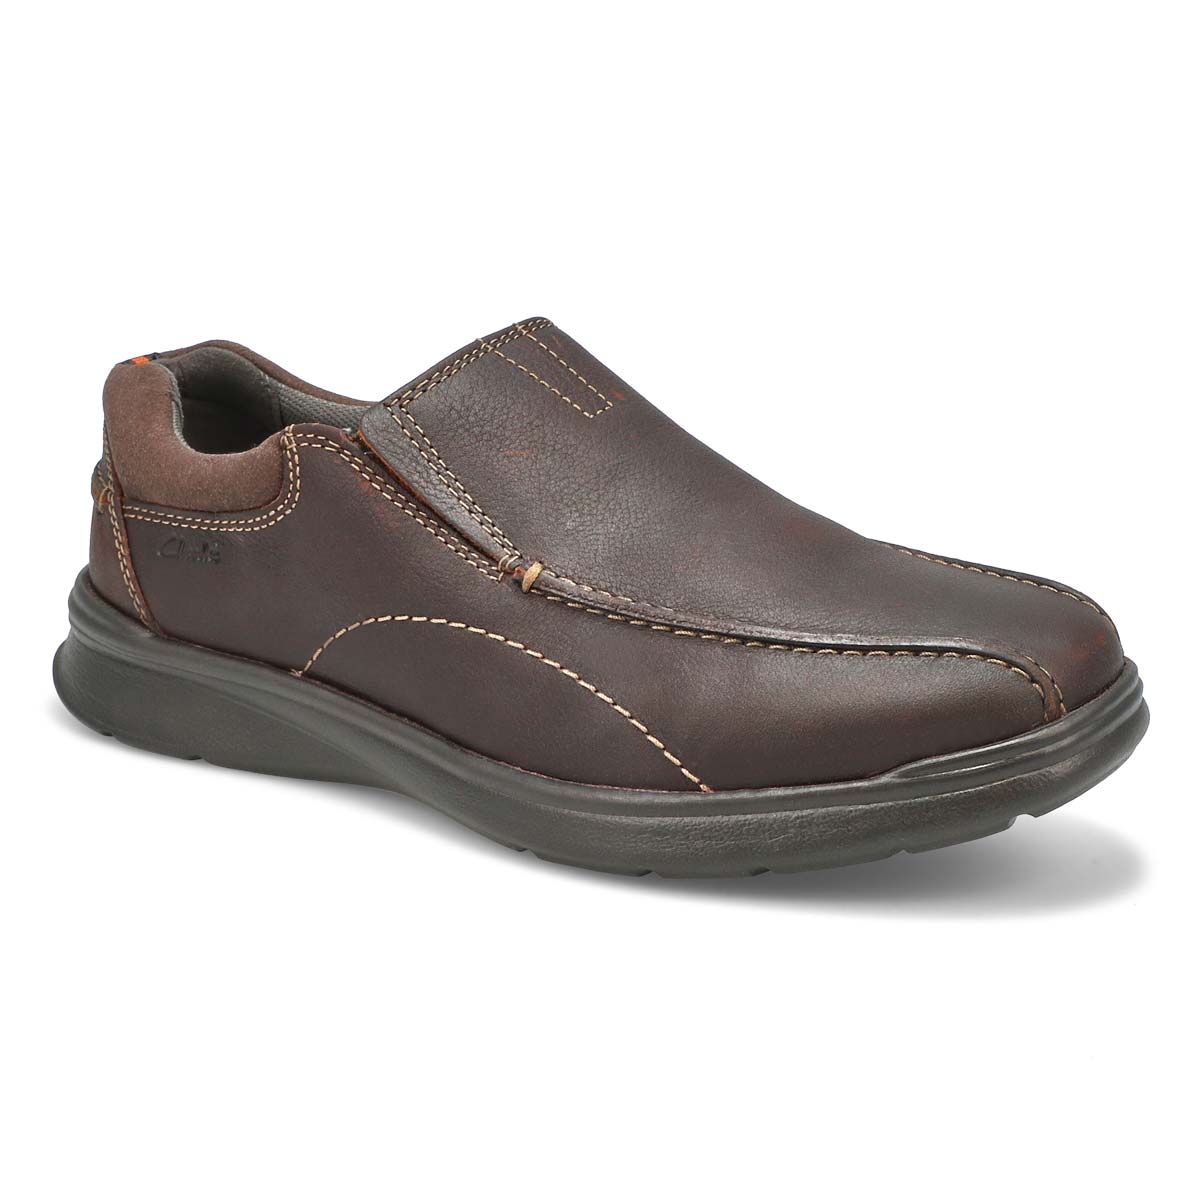 clarks shoes mississauga